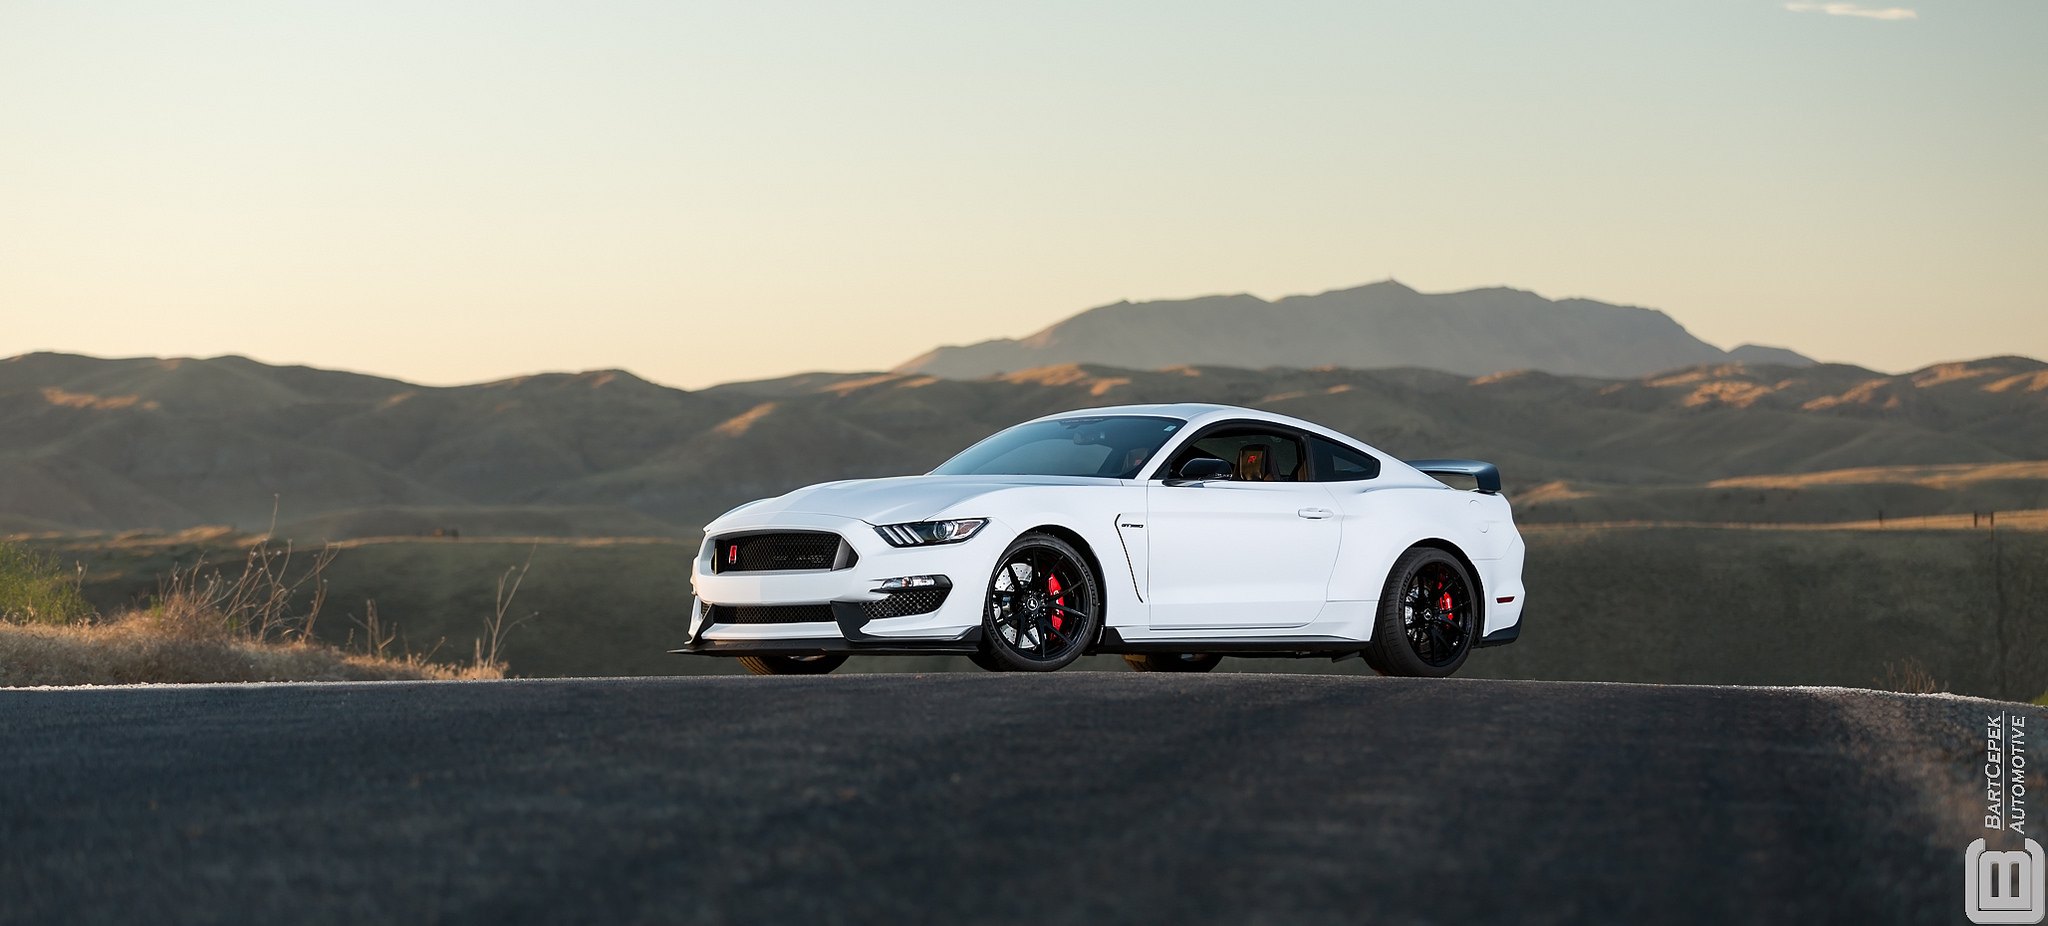 Blacked Out Mesh Grille on Custom White Ford Mustang - Photo by Vorsteiner